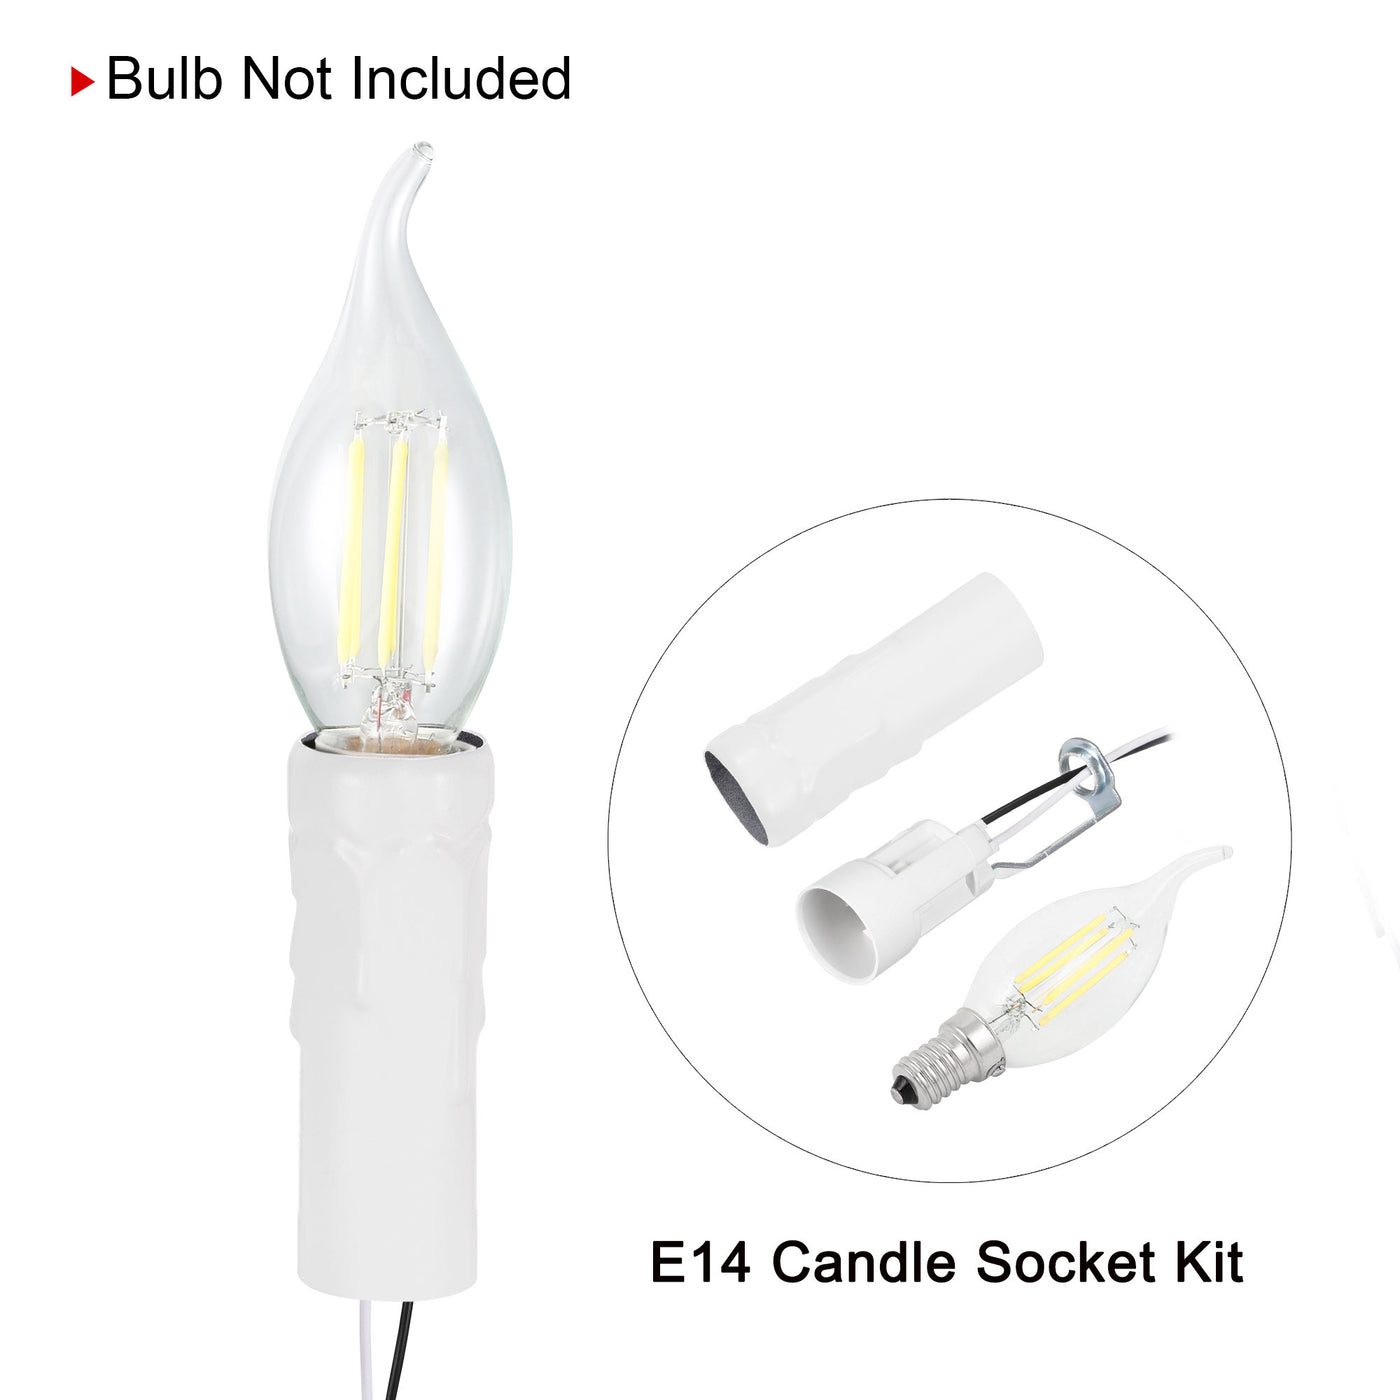 Uxcell Uxcell E14 Candelabra Base Bulb Socket Holder 3 Inch Gold Candle Covers Kit 6 Sets